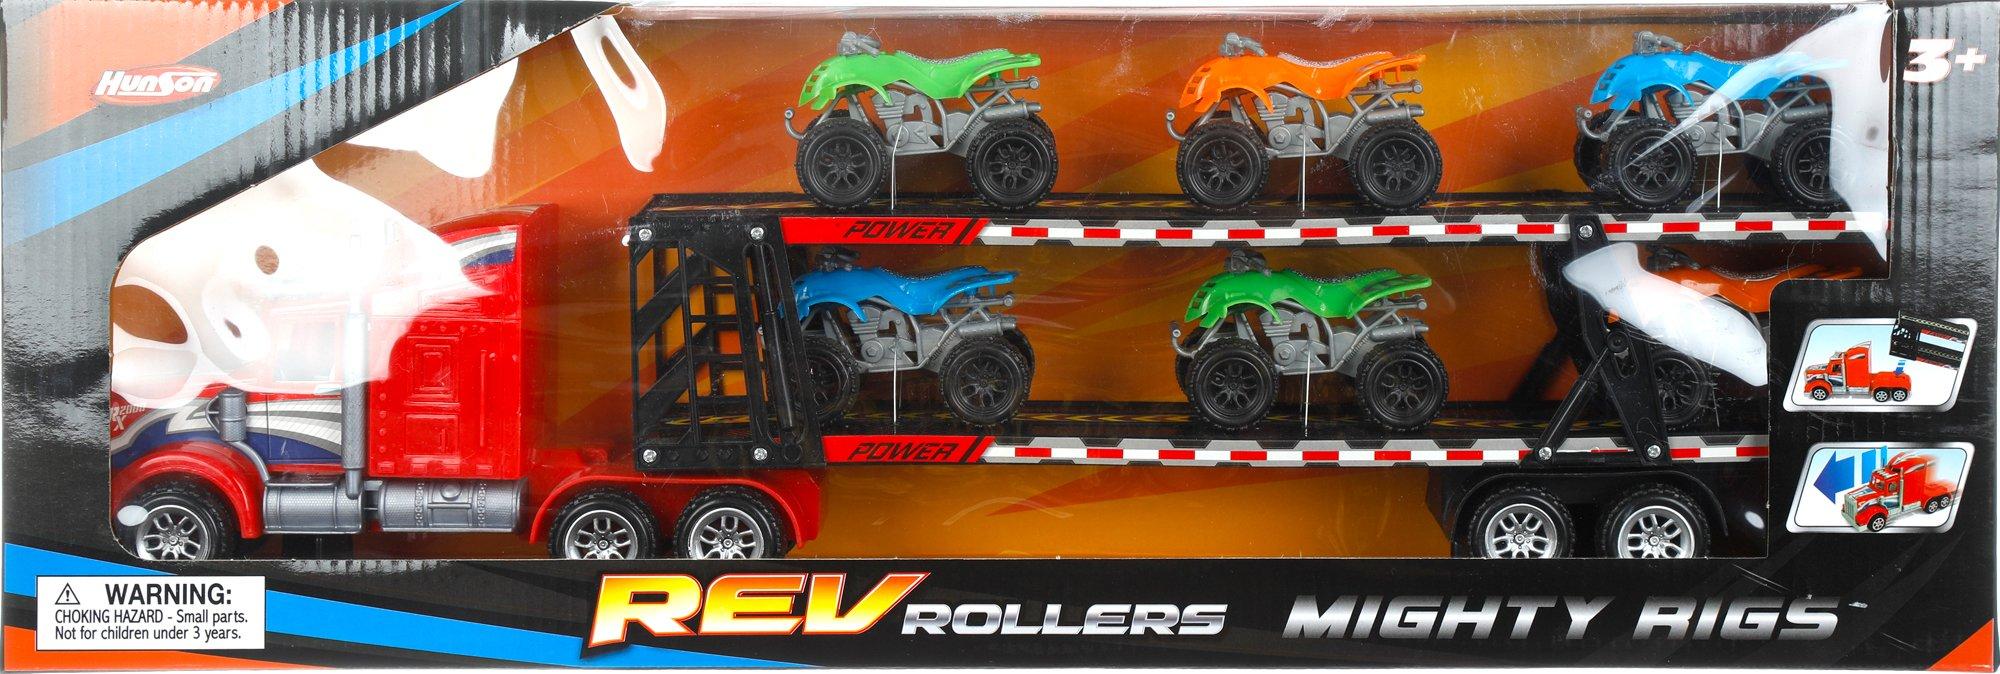 Rev Rollers Mighty Rigs  - Red